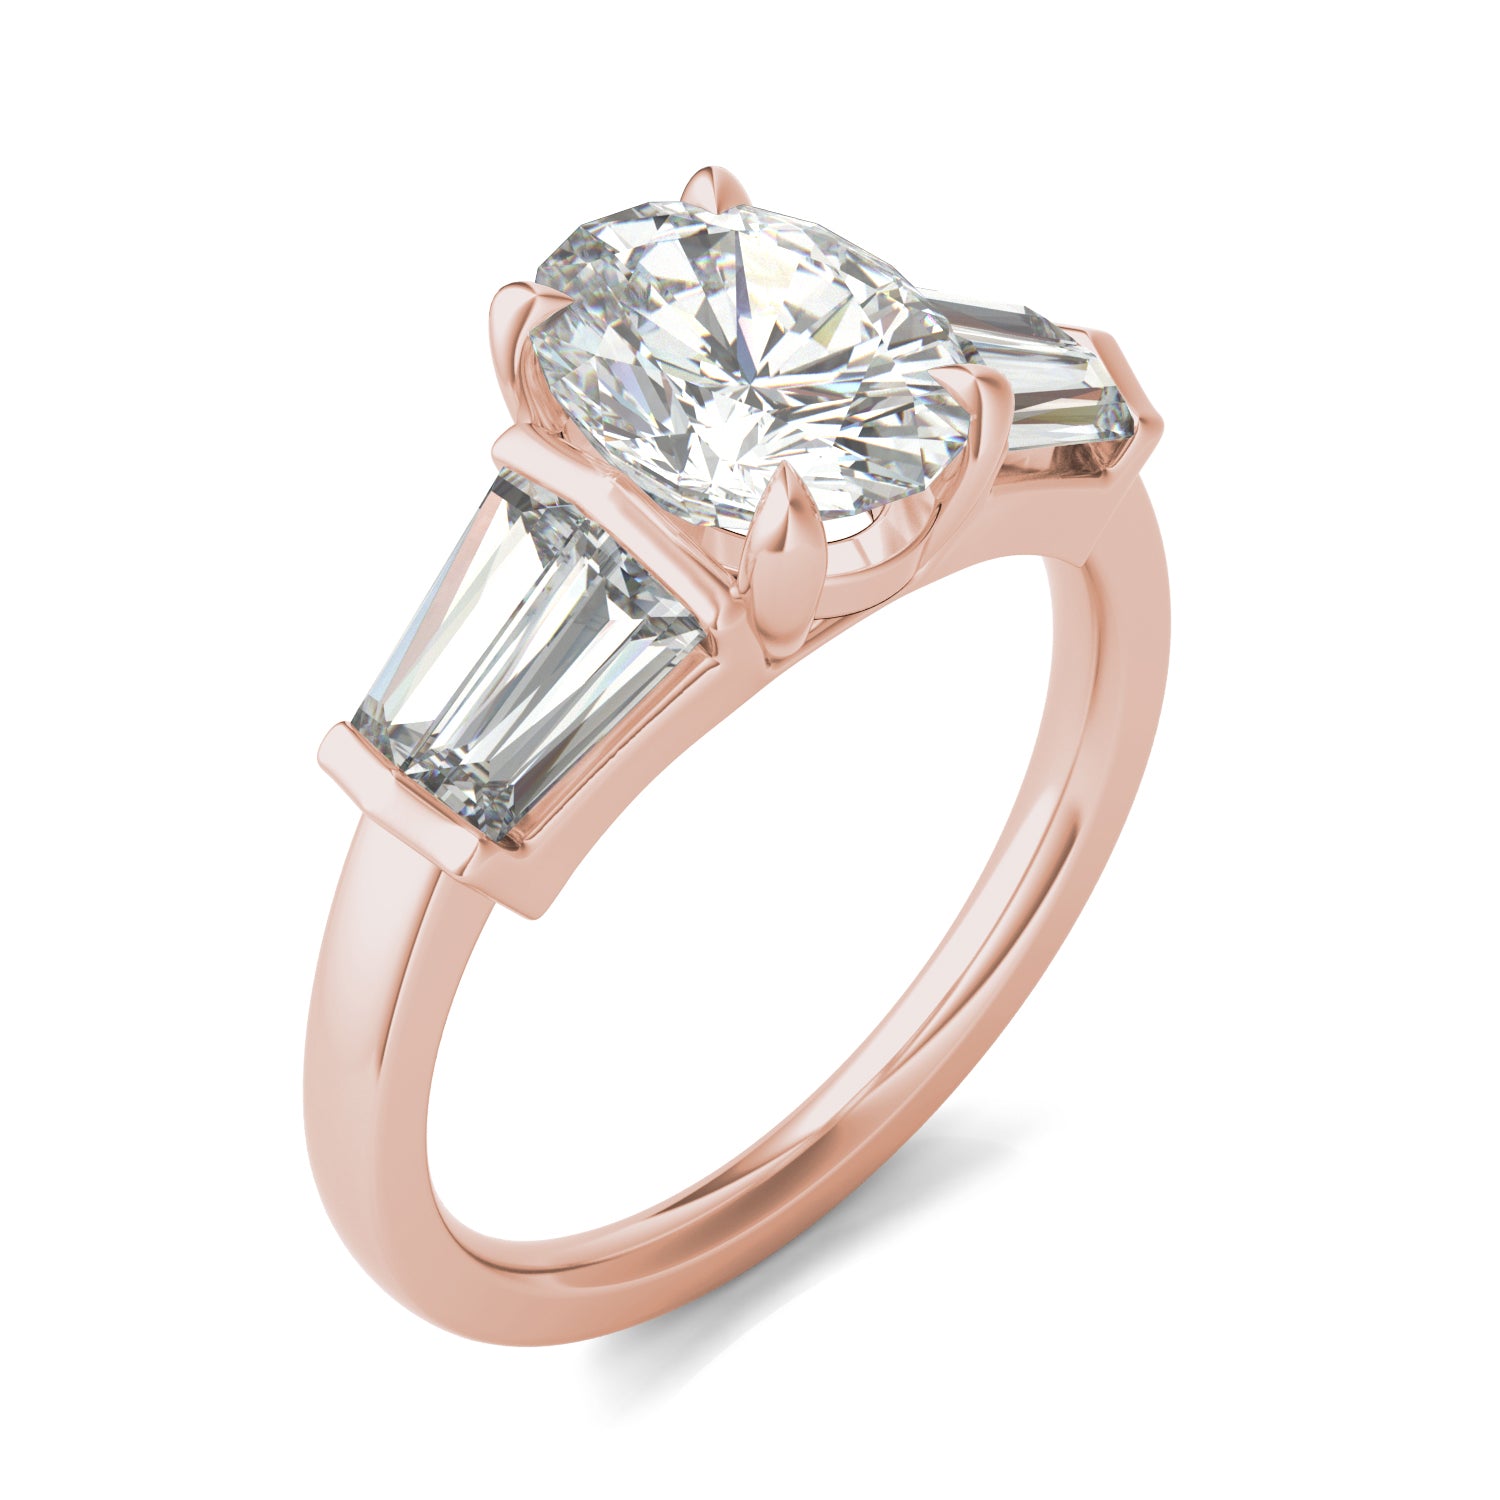 3.26 CTW DEW Oval Moissanite Five Stone Ring in 14K Rose Gold